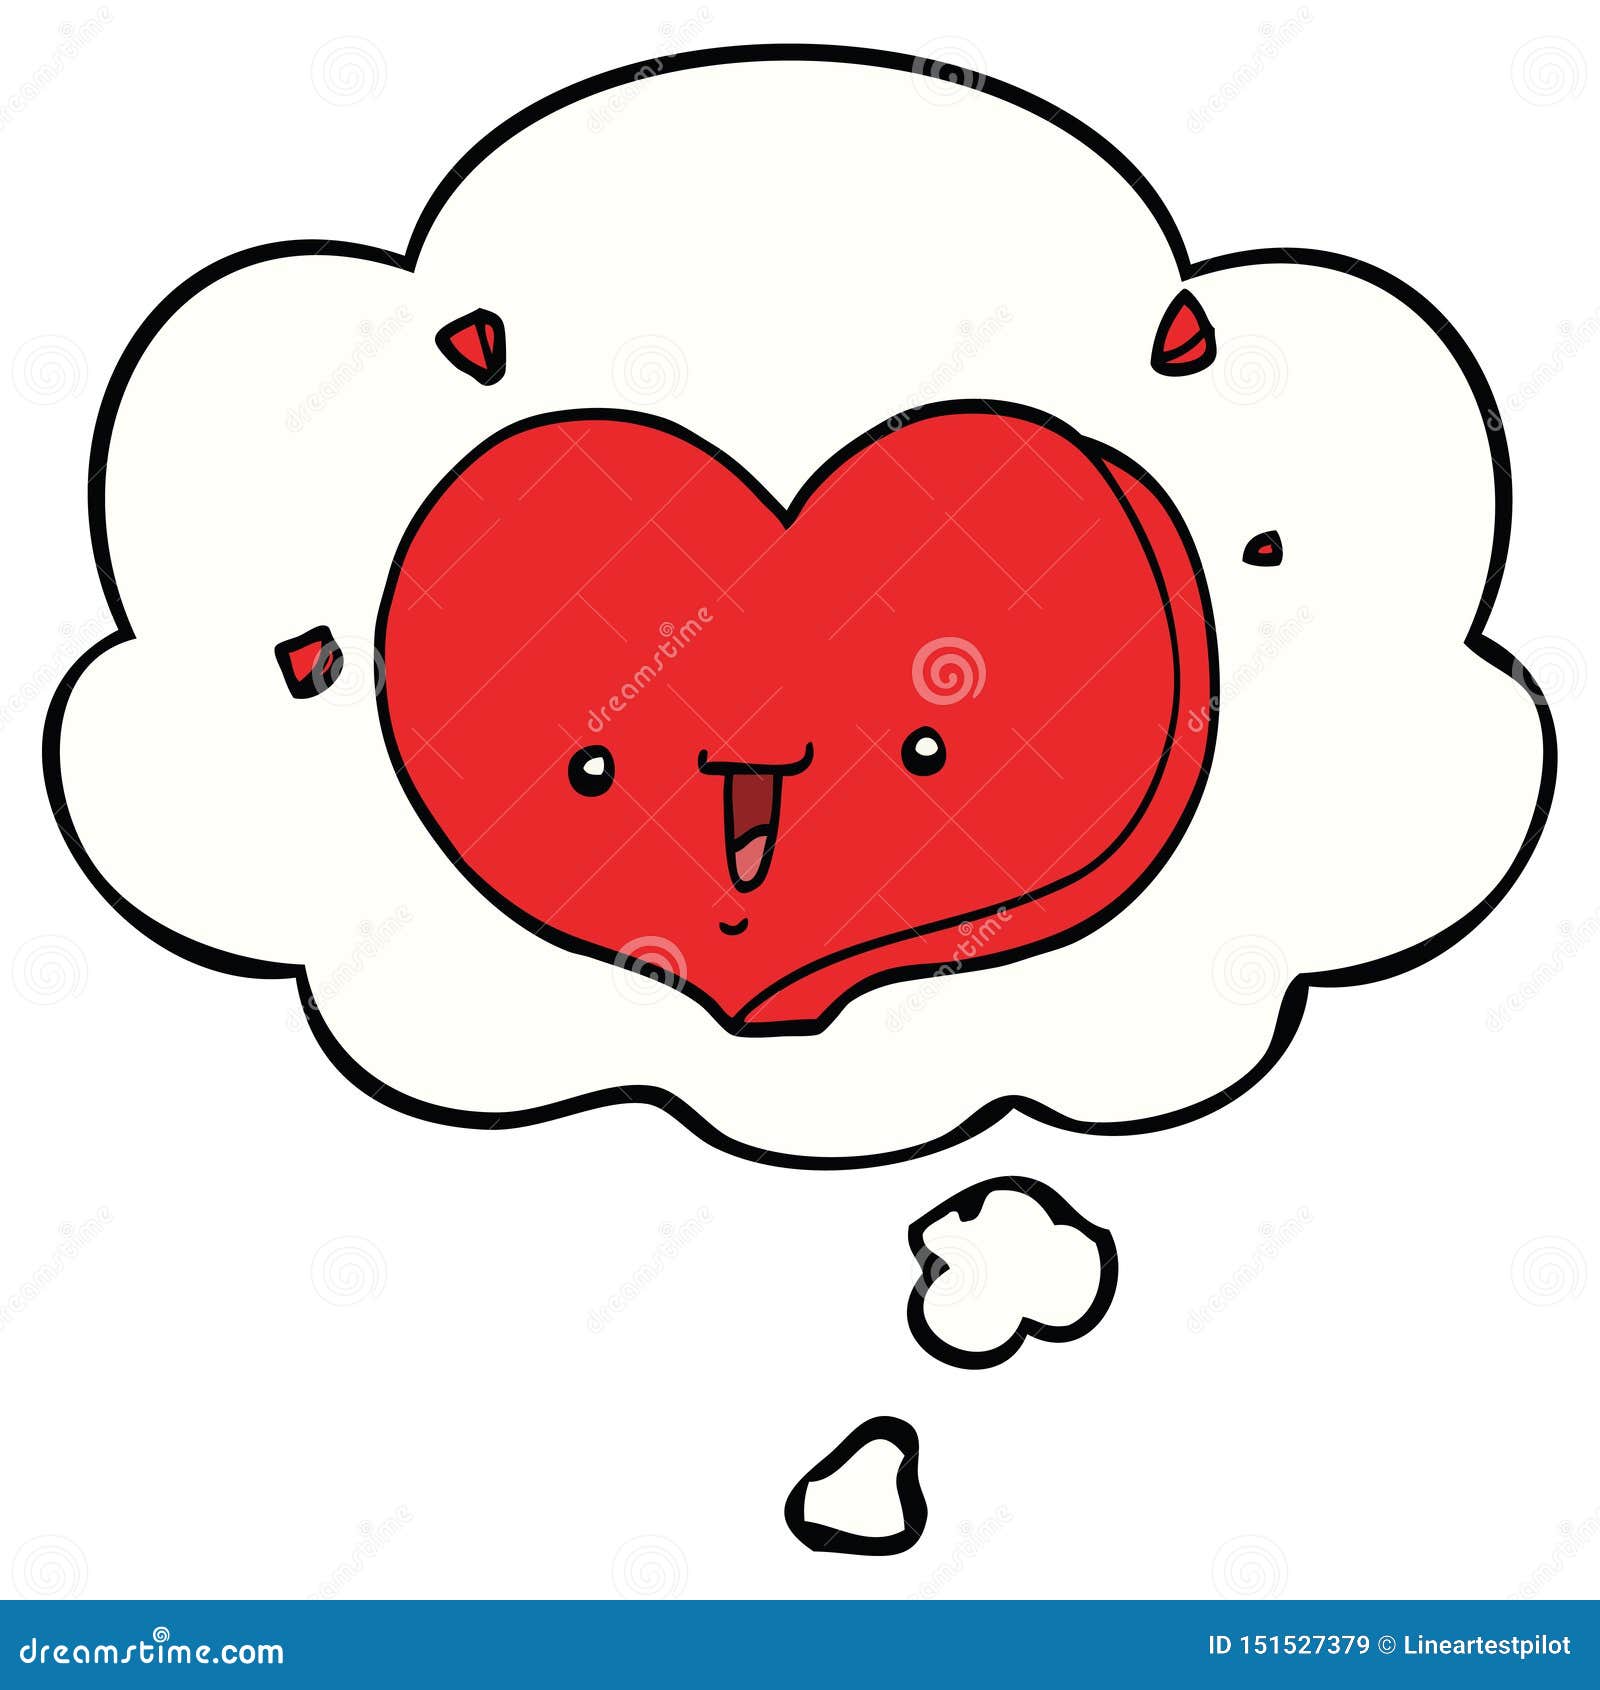 A Creative Cartoon Happy Love Heart And Thought Bubble